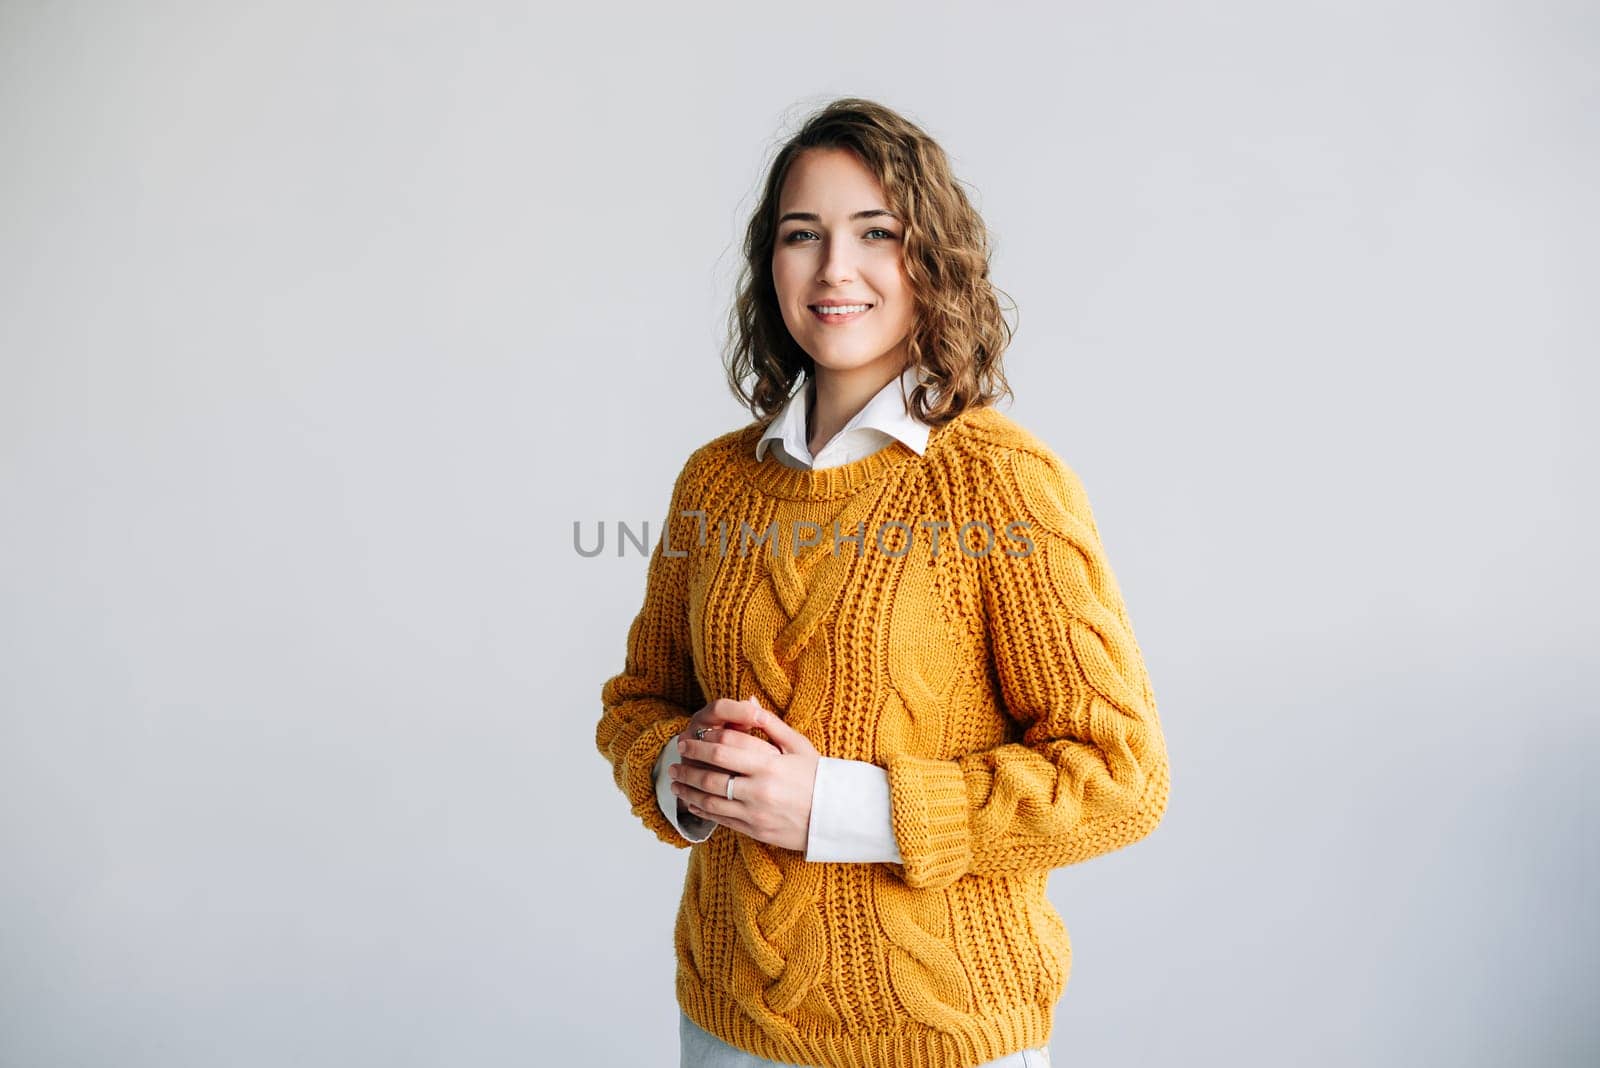 Joyful Professional Woman: Smiling, Beautiful, and Charming Model - Positive, Cheerful, and Pretty - Curly-haired Student Looks at Camera - Isolated Portrait - Confident and Vibrant Expression by ViShark